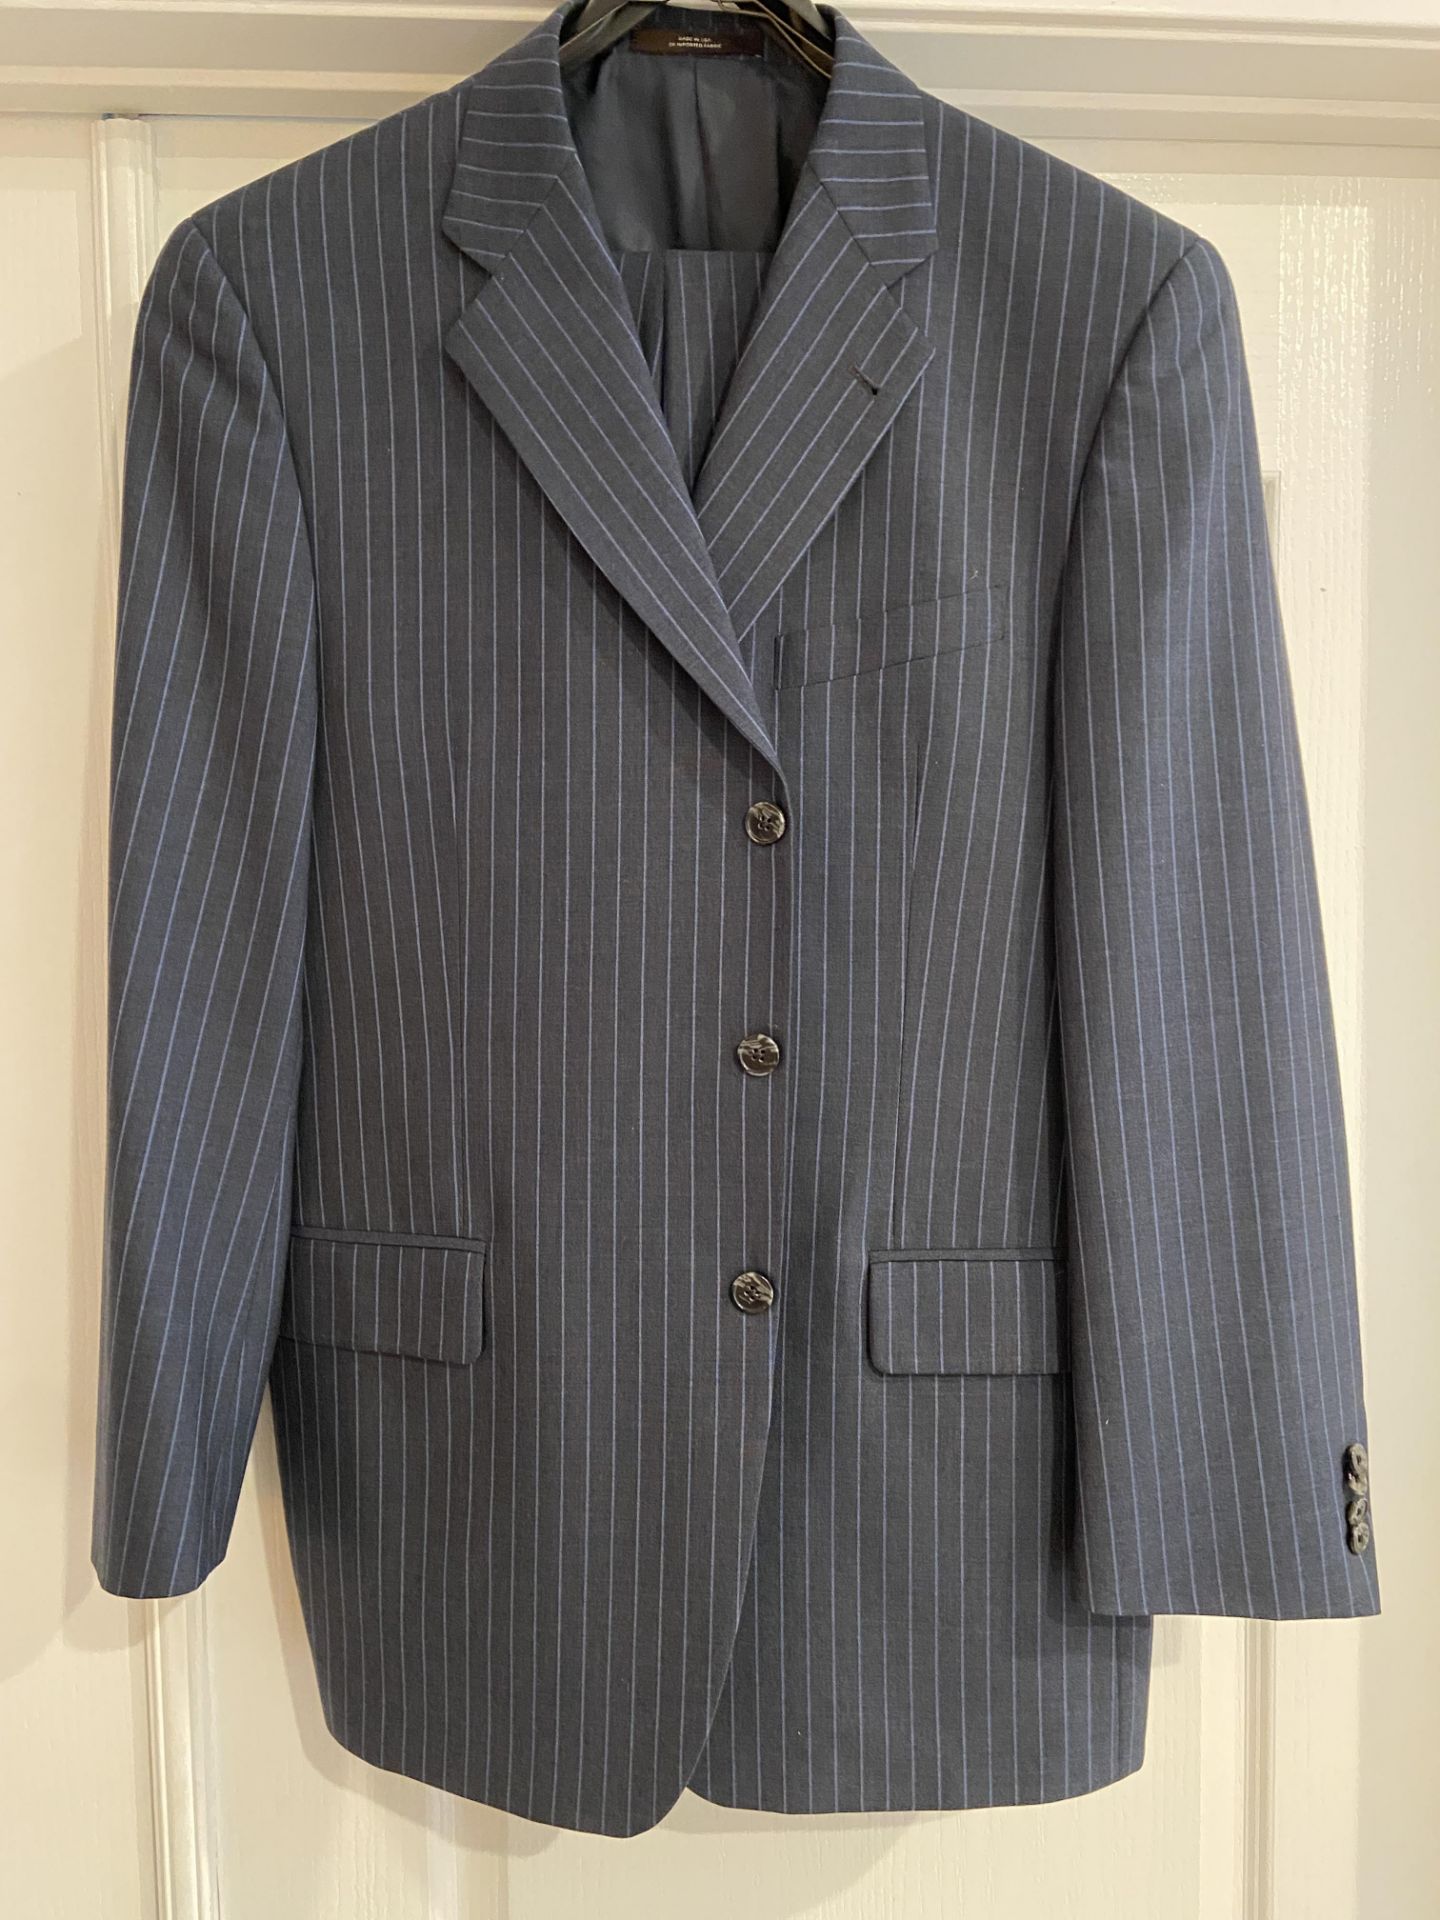 Collection of High End Men's Clothing: 6 Suits Size 42R, 1 Sport Jacket Size 42R, 1 Polo XL - Image 8 of 18